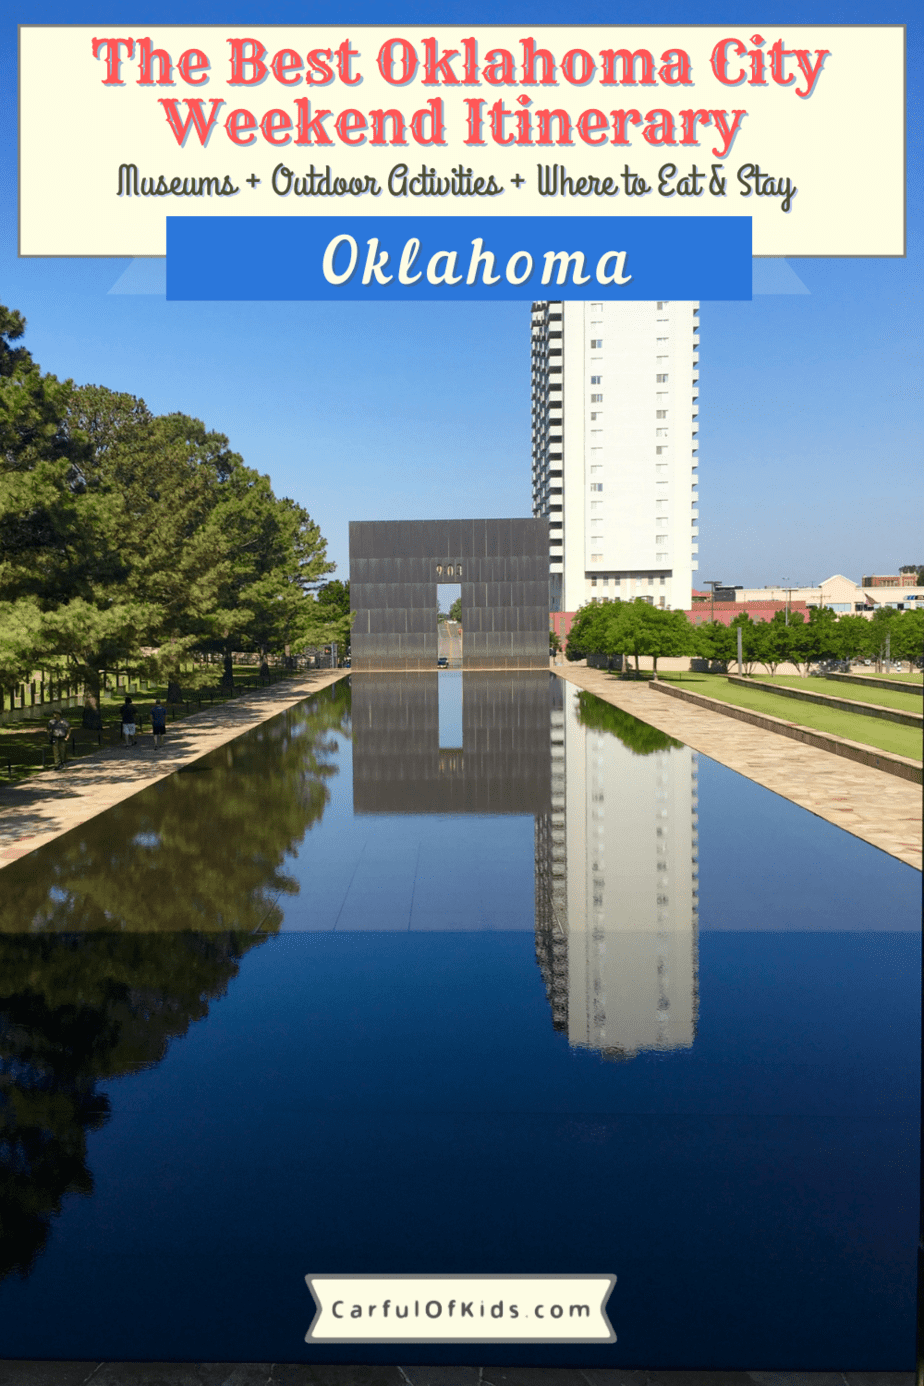 Head to Oklahoma City in Central Oklahoma for a weekend getaway with a focus on sports and outdoors along with the arts scene in OKC. See a ball game. Tour a Cowboy Museum. Reflect at the Memorial. Find where to stay in OKC and where to find the best steaks in Oklahoma City. #OKC #OklahomaCity 